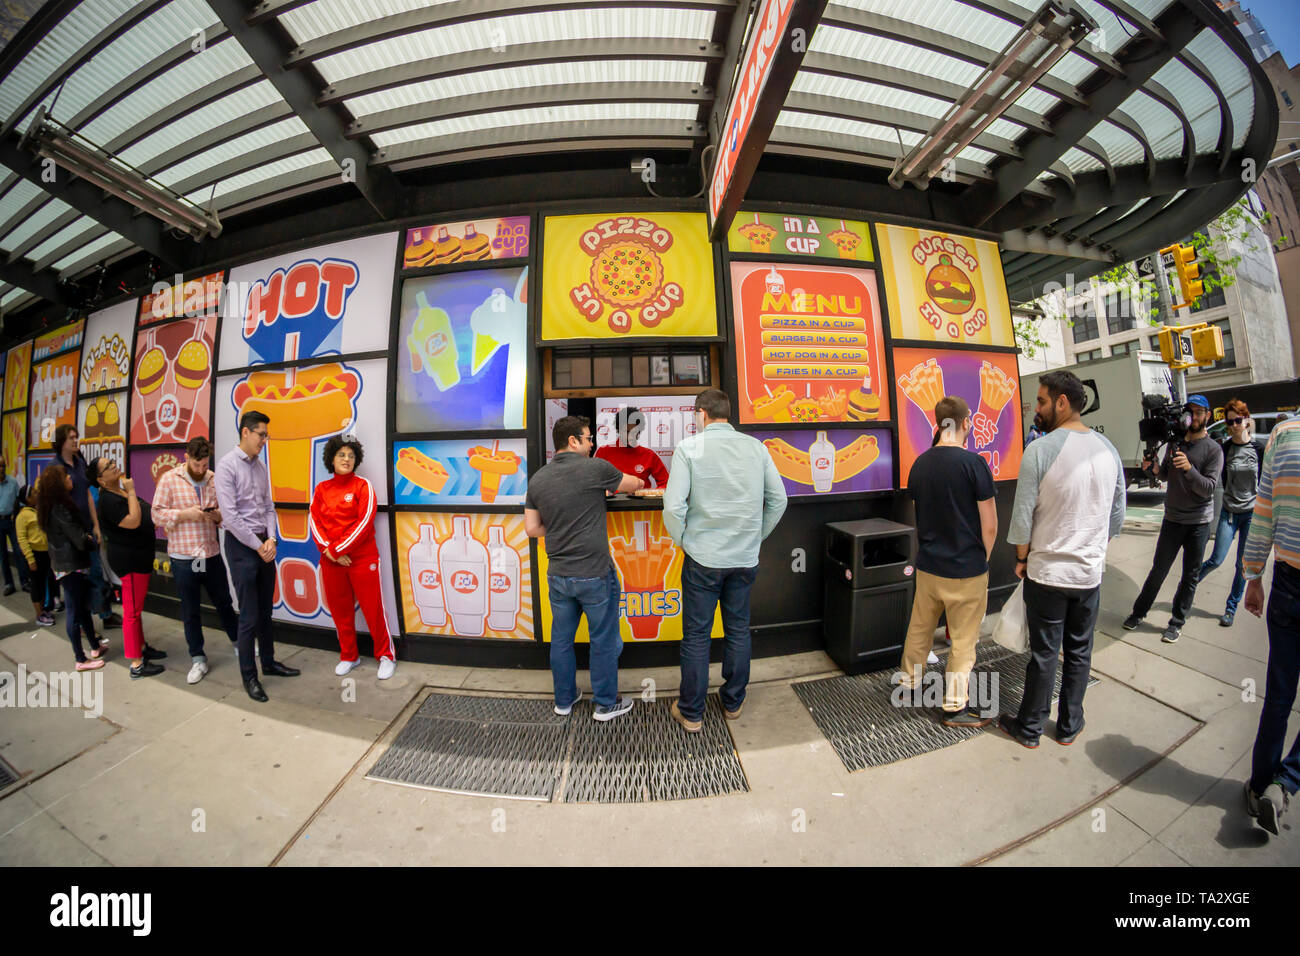 Participants line up to to be filmed trying samples of products from the fictional company â€œBuy n Largeâ€, in Midtown Manhattan in New York on Wednesday, May 8, 2019. â€œBuy n Largeâ€ is a fictional company used in several of Pixar films including â€œWALL-Eâ€.  (Â© Richard B. Levine) Stock Photo